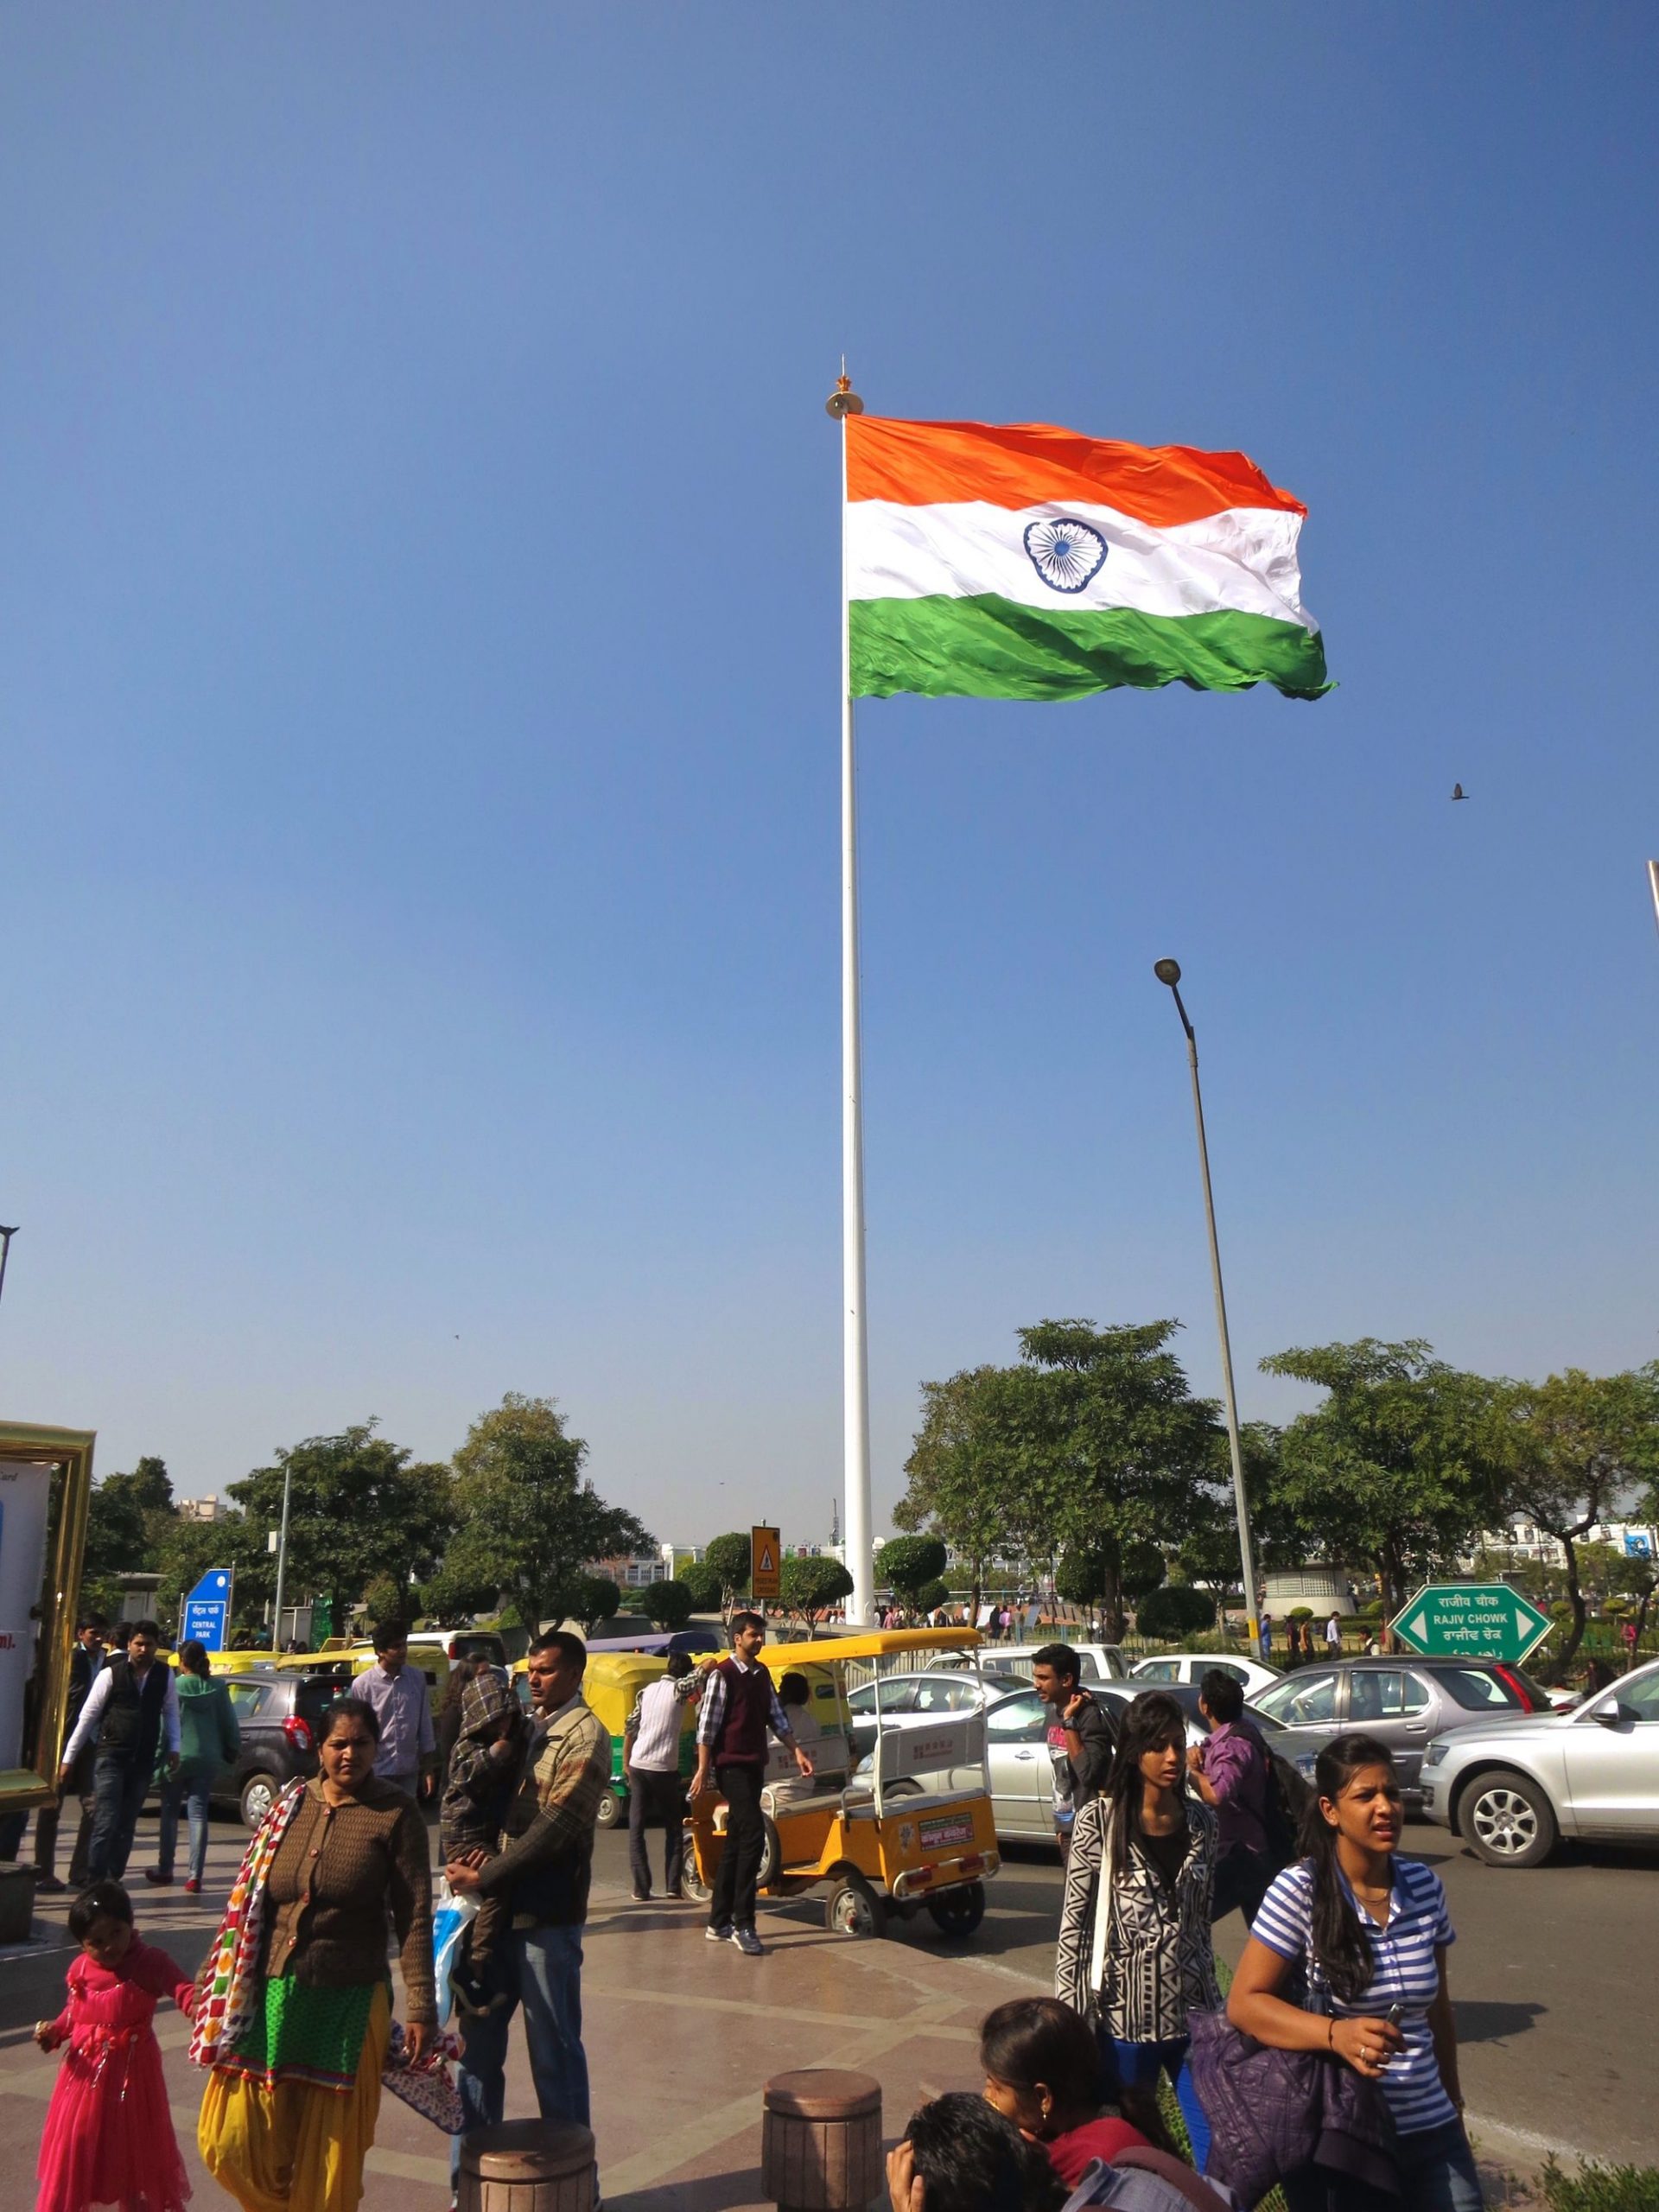 The largest Indian national flag hoisted at Central Park in Connaught Place, Delhi